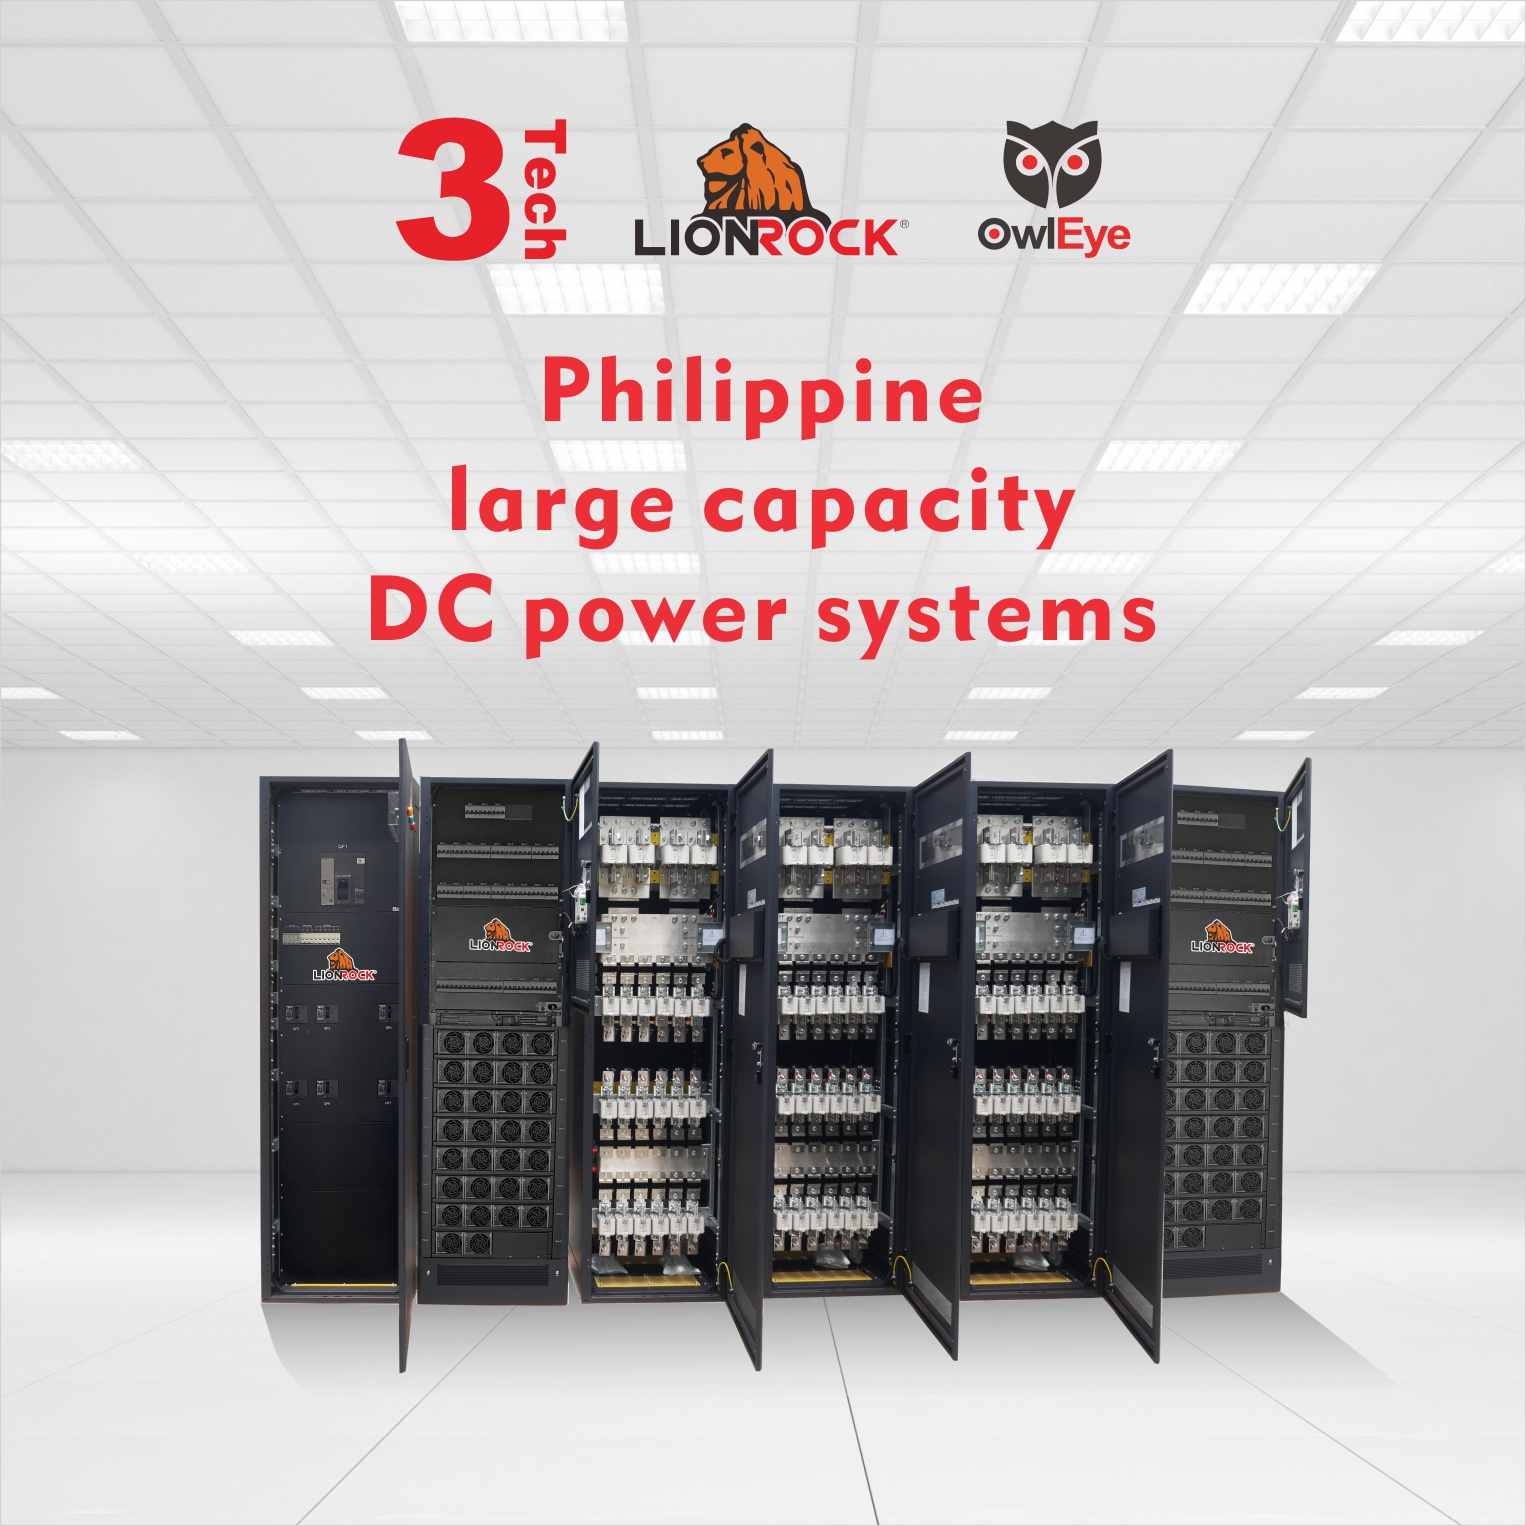 Philippine large capacity DC power systems,Projects,NEWS,3TECH